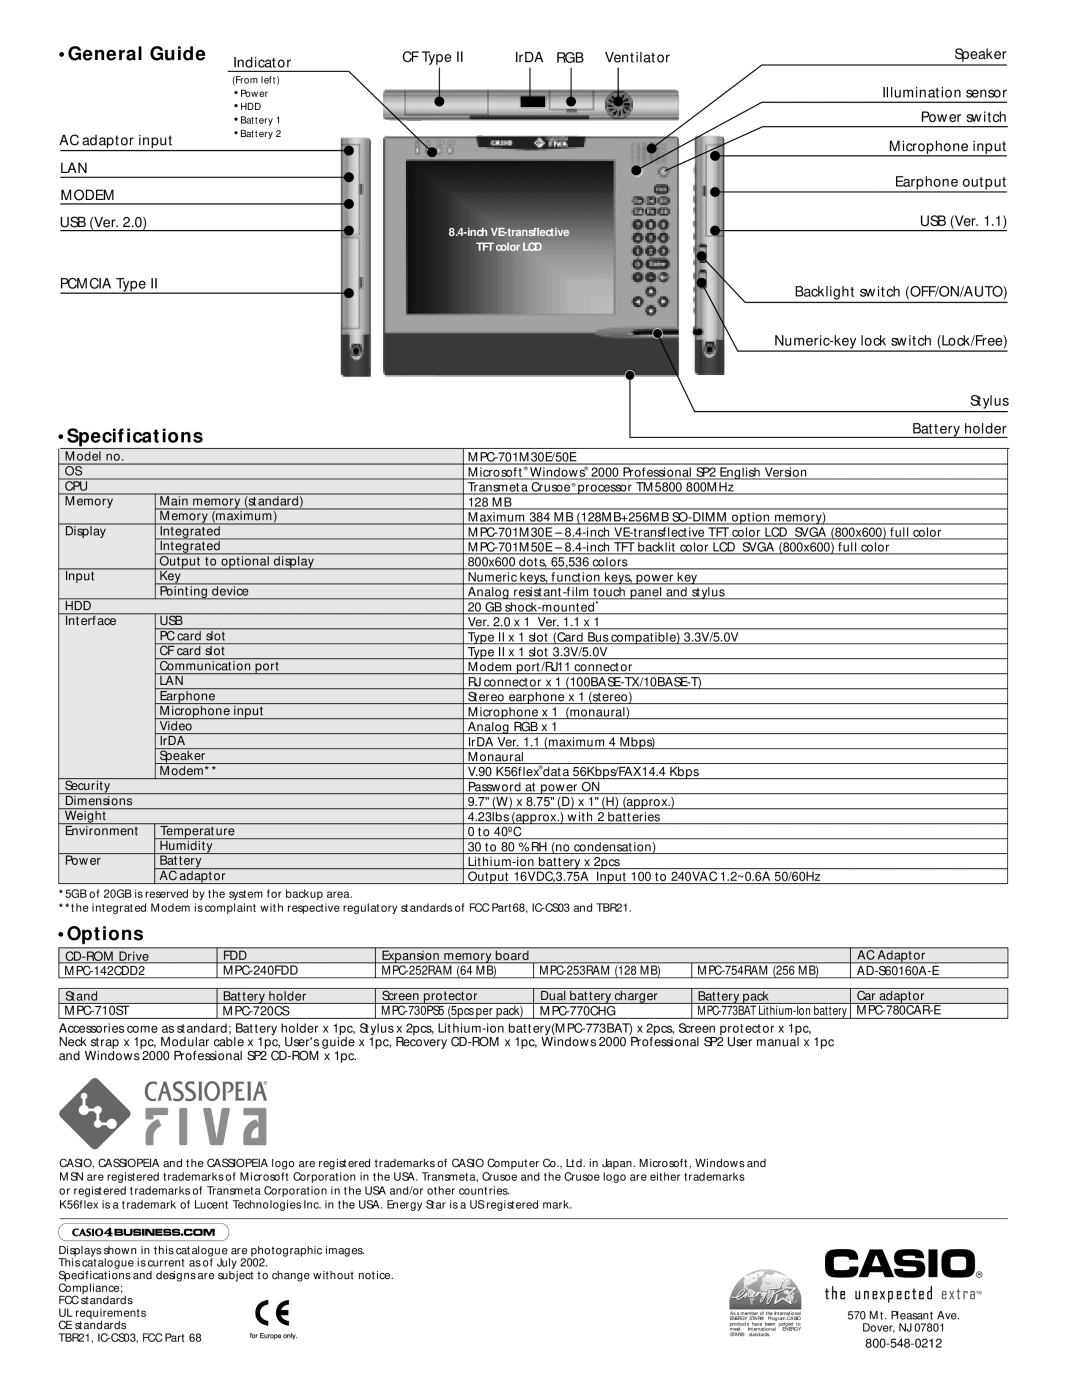 Delta MPC-701M30E inch VE-transflective TFT color LCD, General Guide, Specifications, Options, Indicator, CF Type, Speaker 